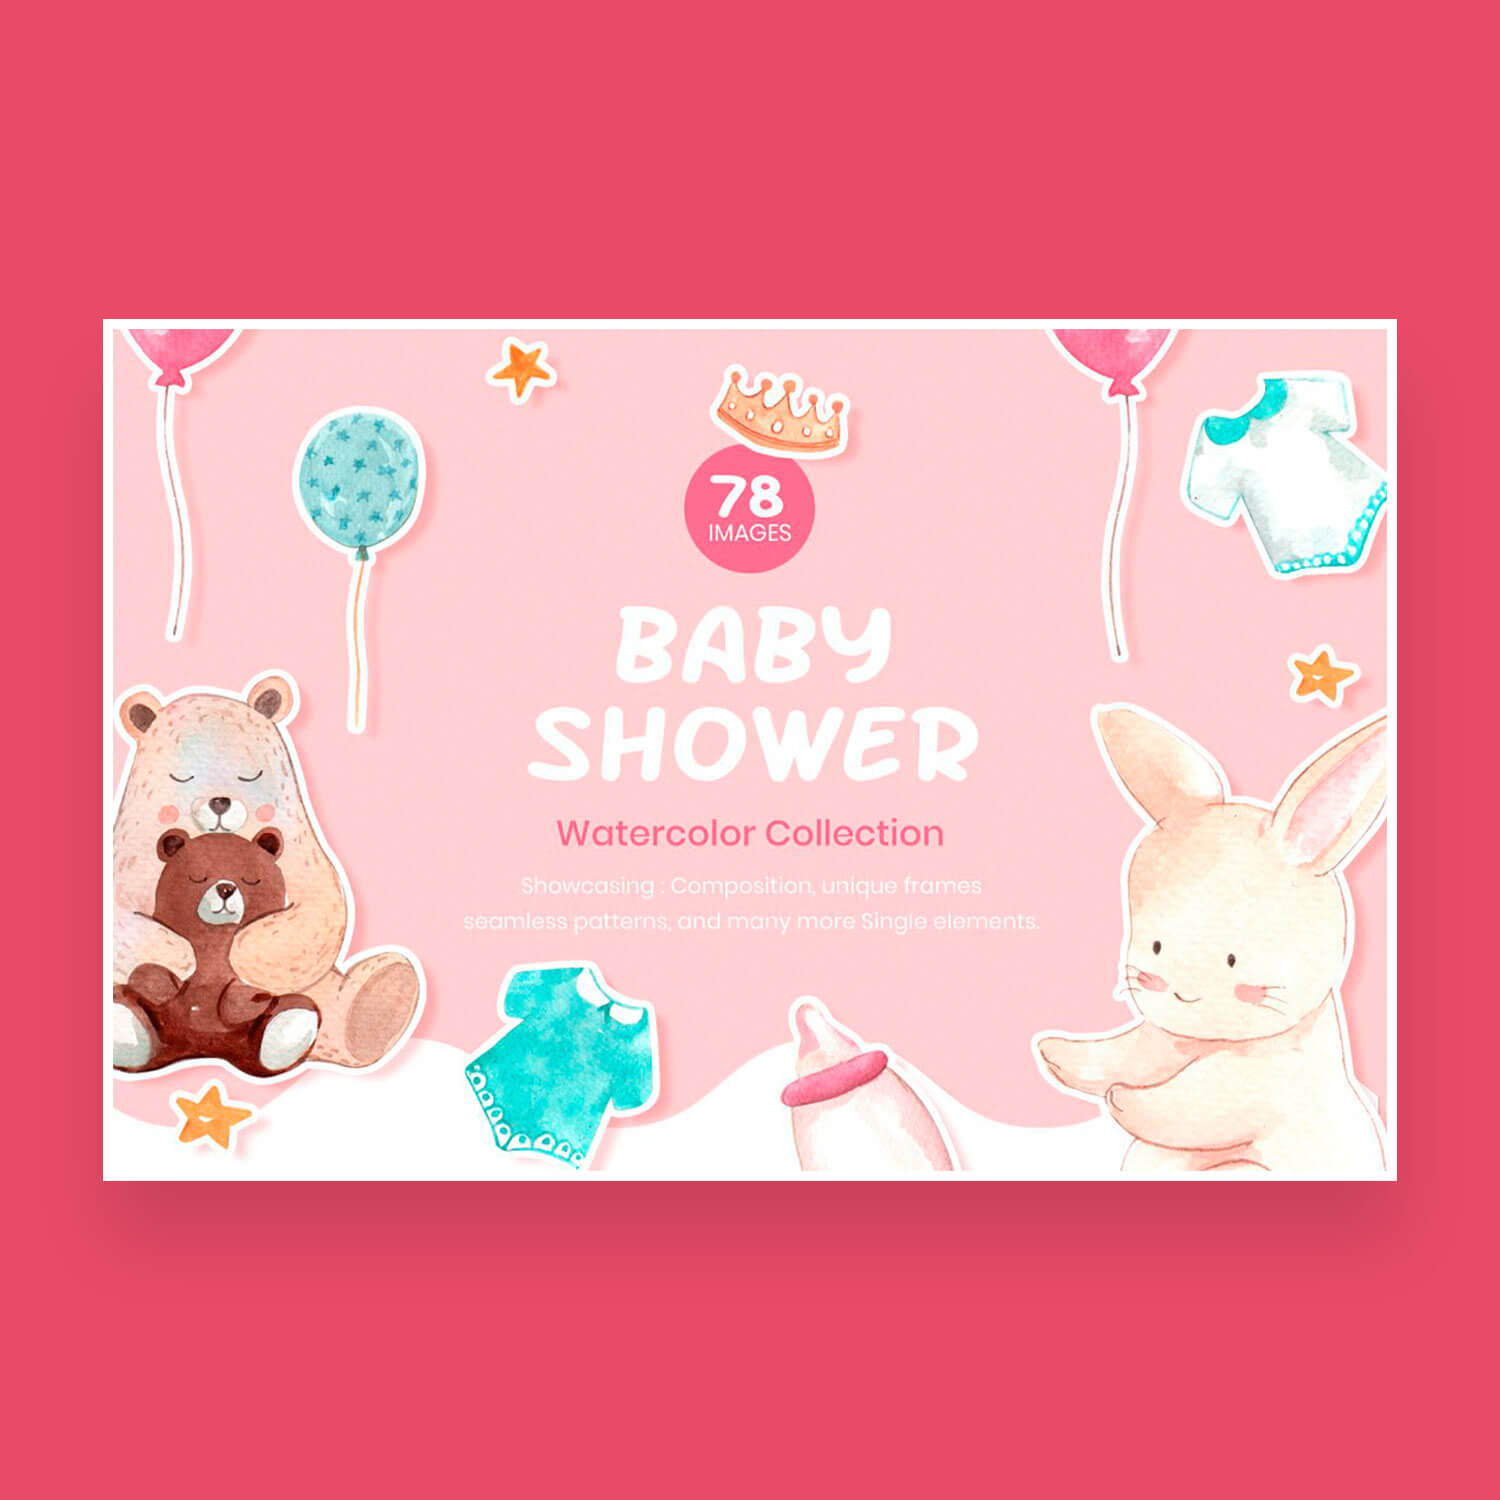 Baby Shower Watercolor Collection on pink Background: 78 Images.